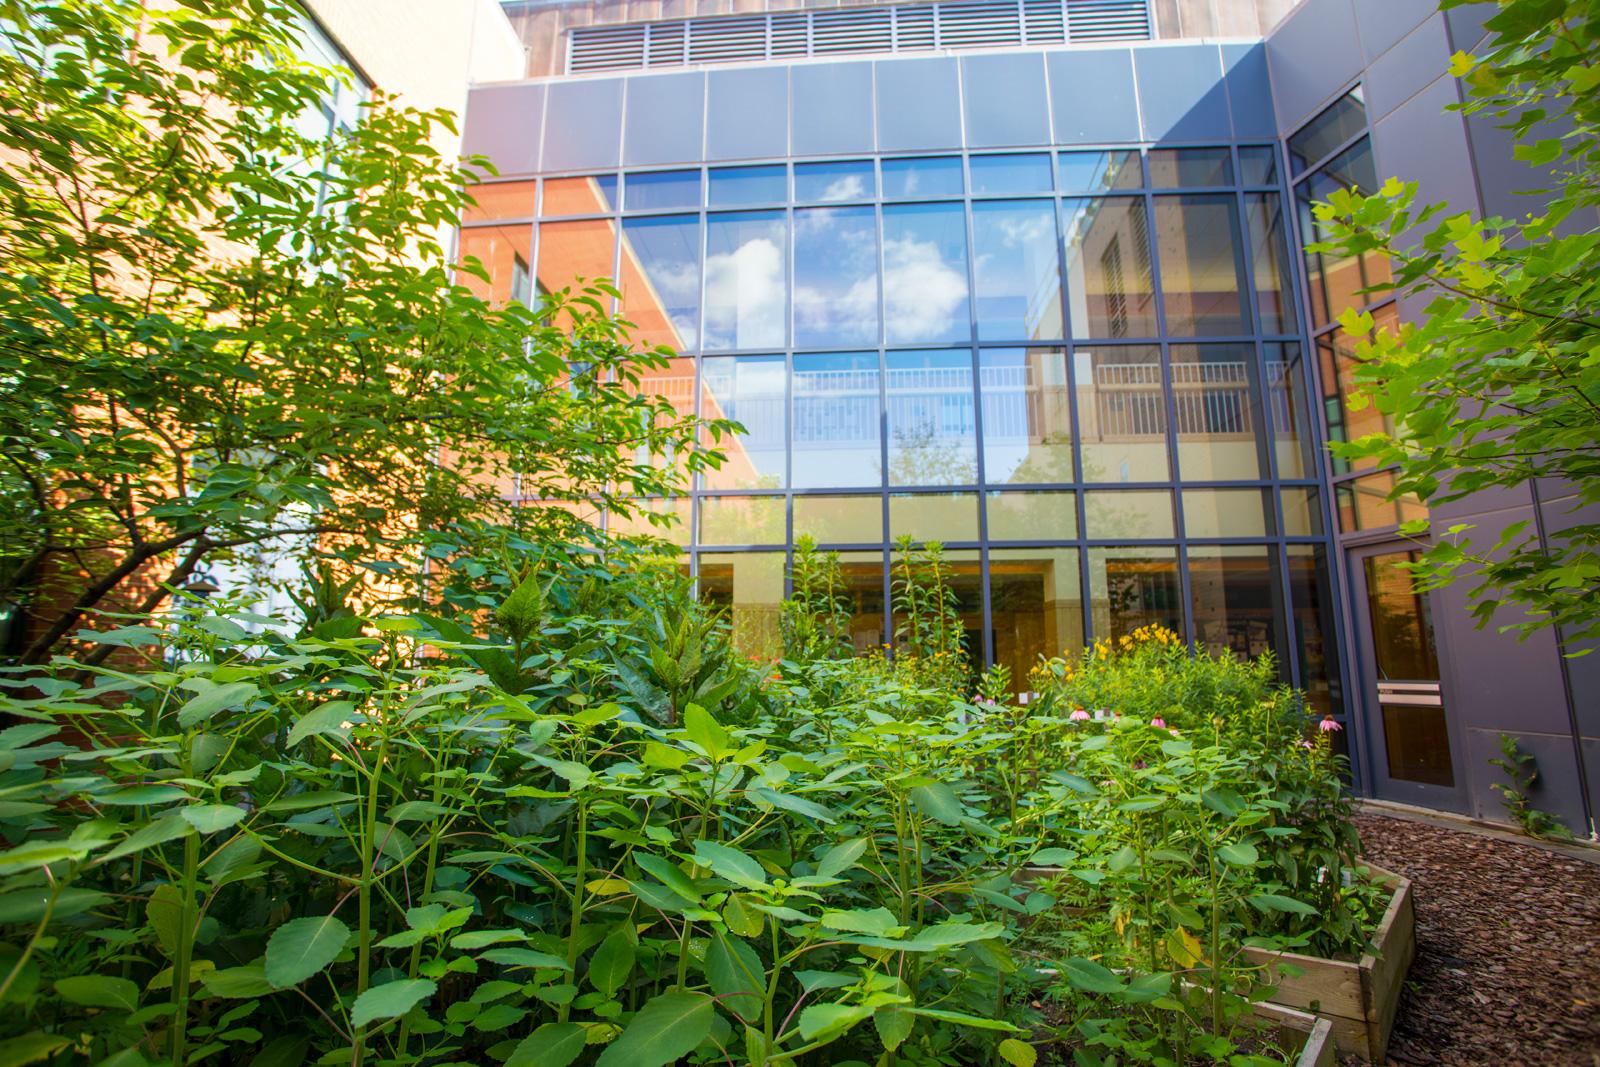 Lush green plants against the glass wall of a building.